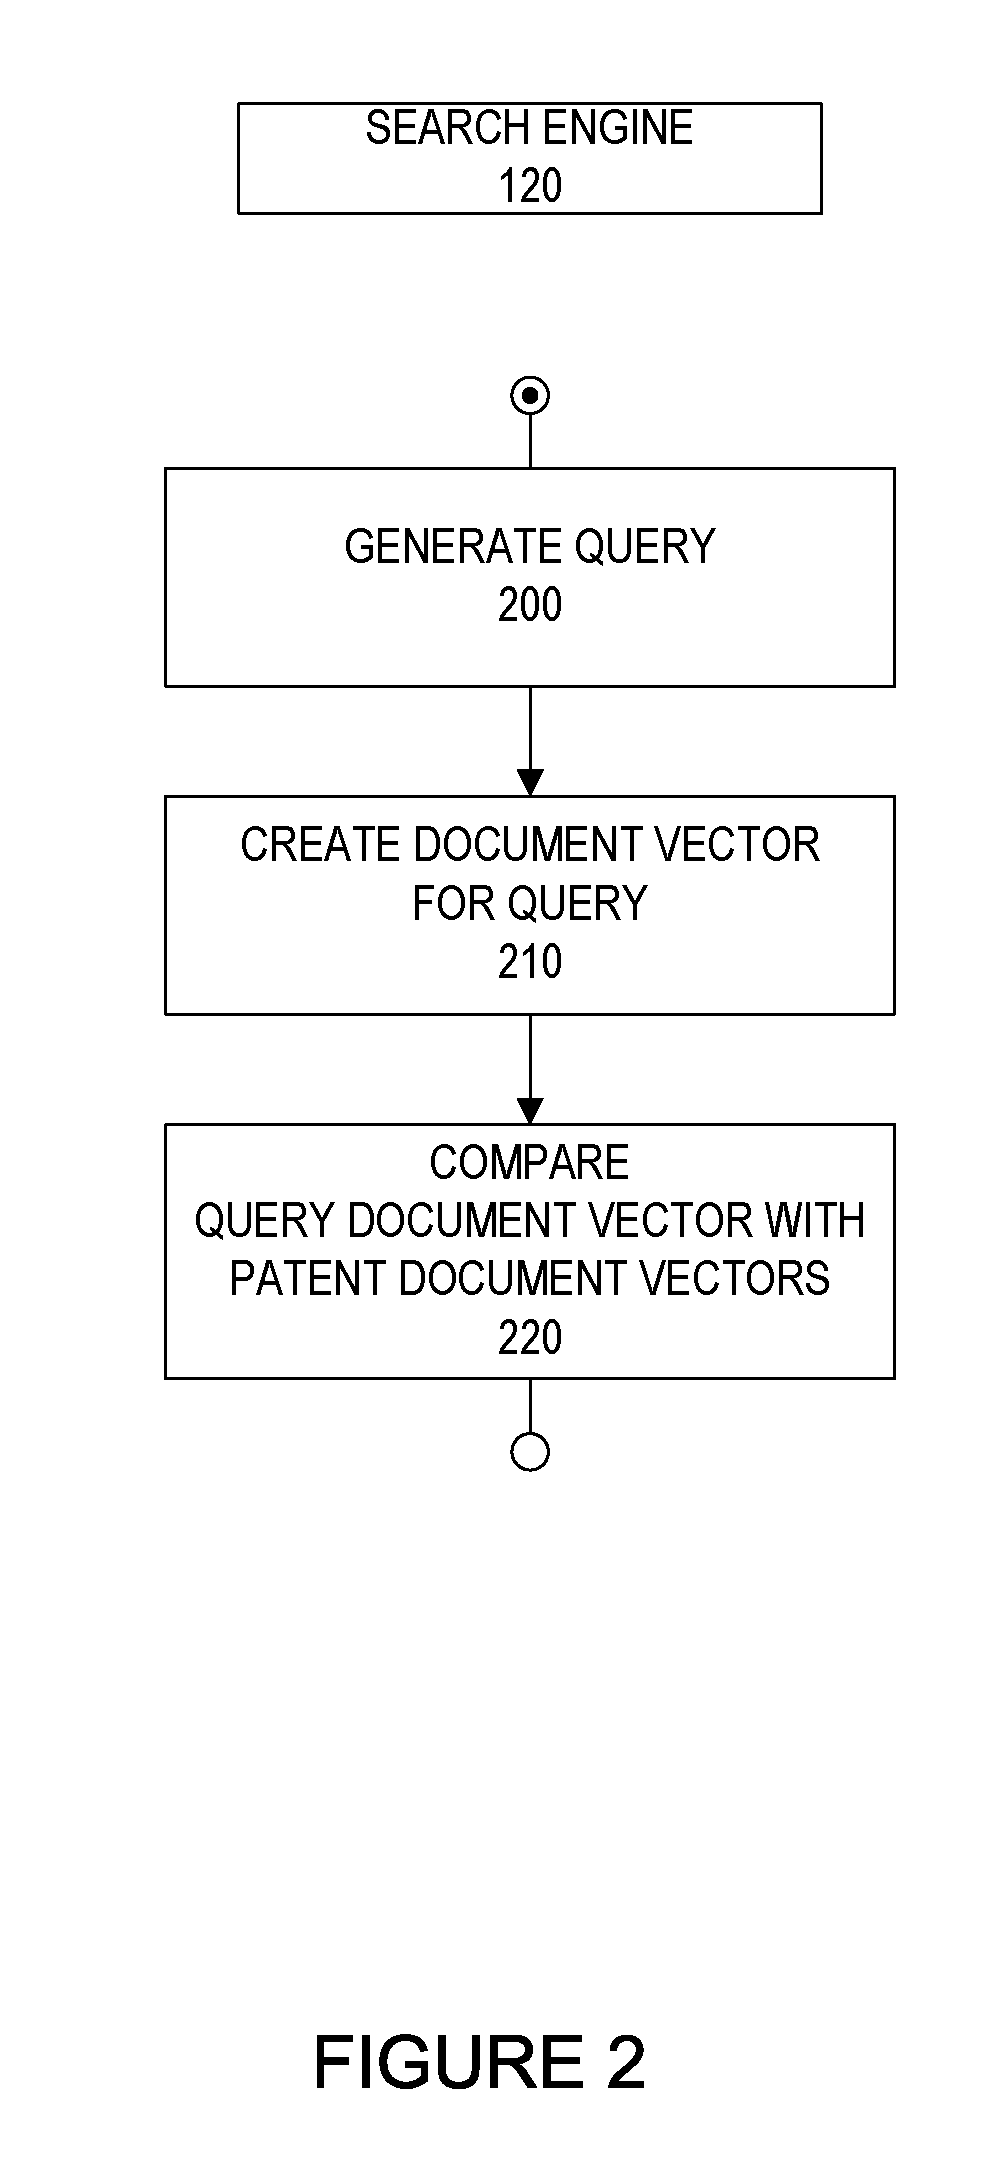 Generating intellectual property intelligence using a patent search engine